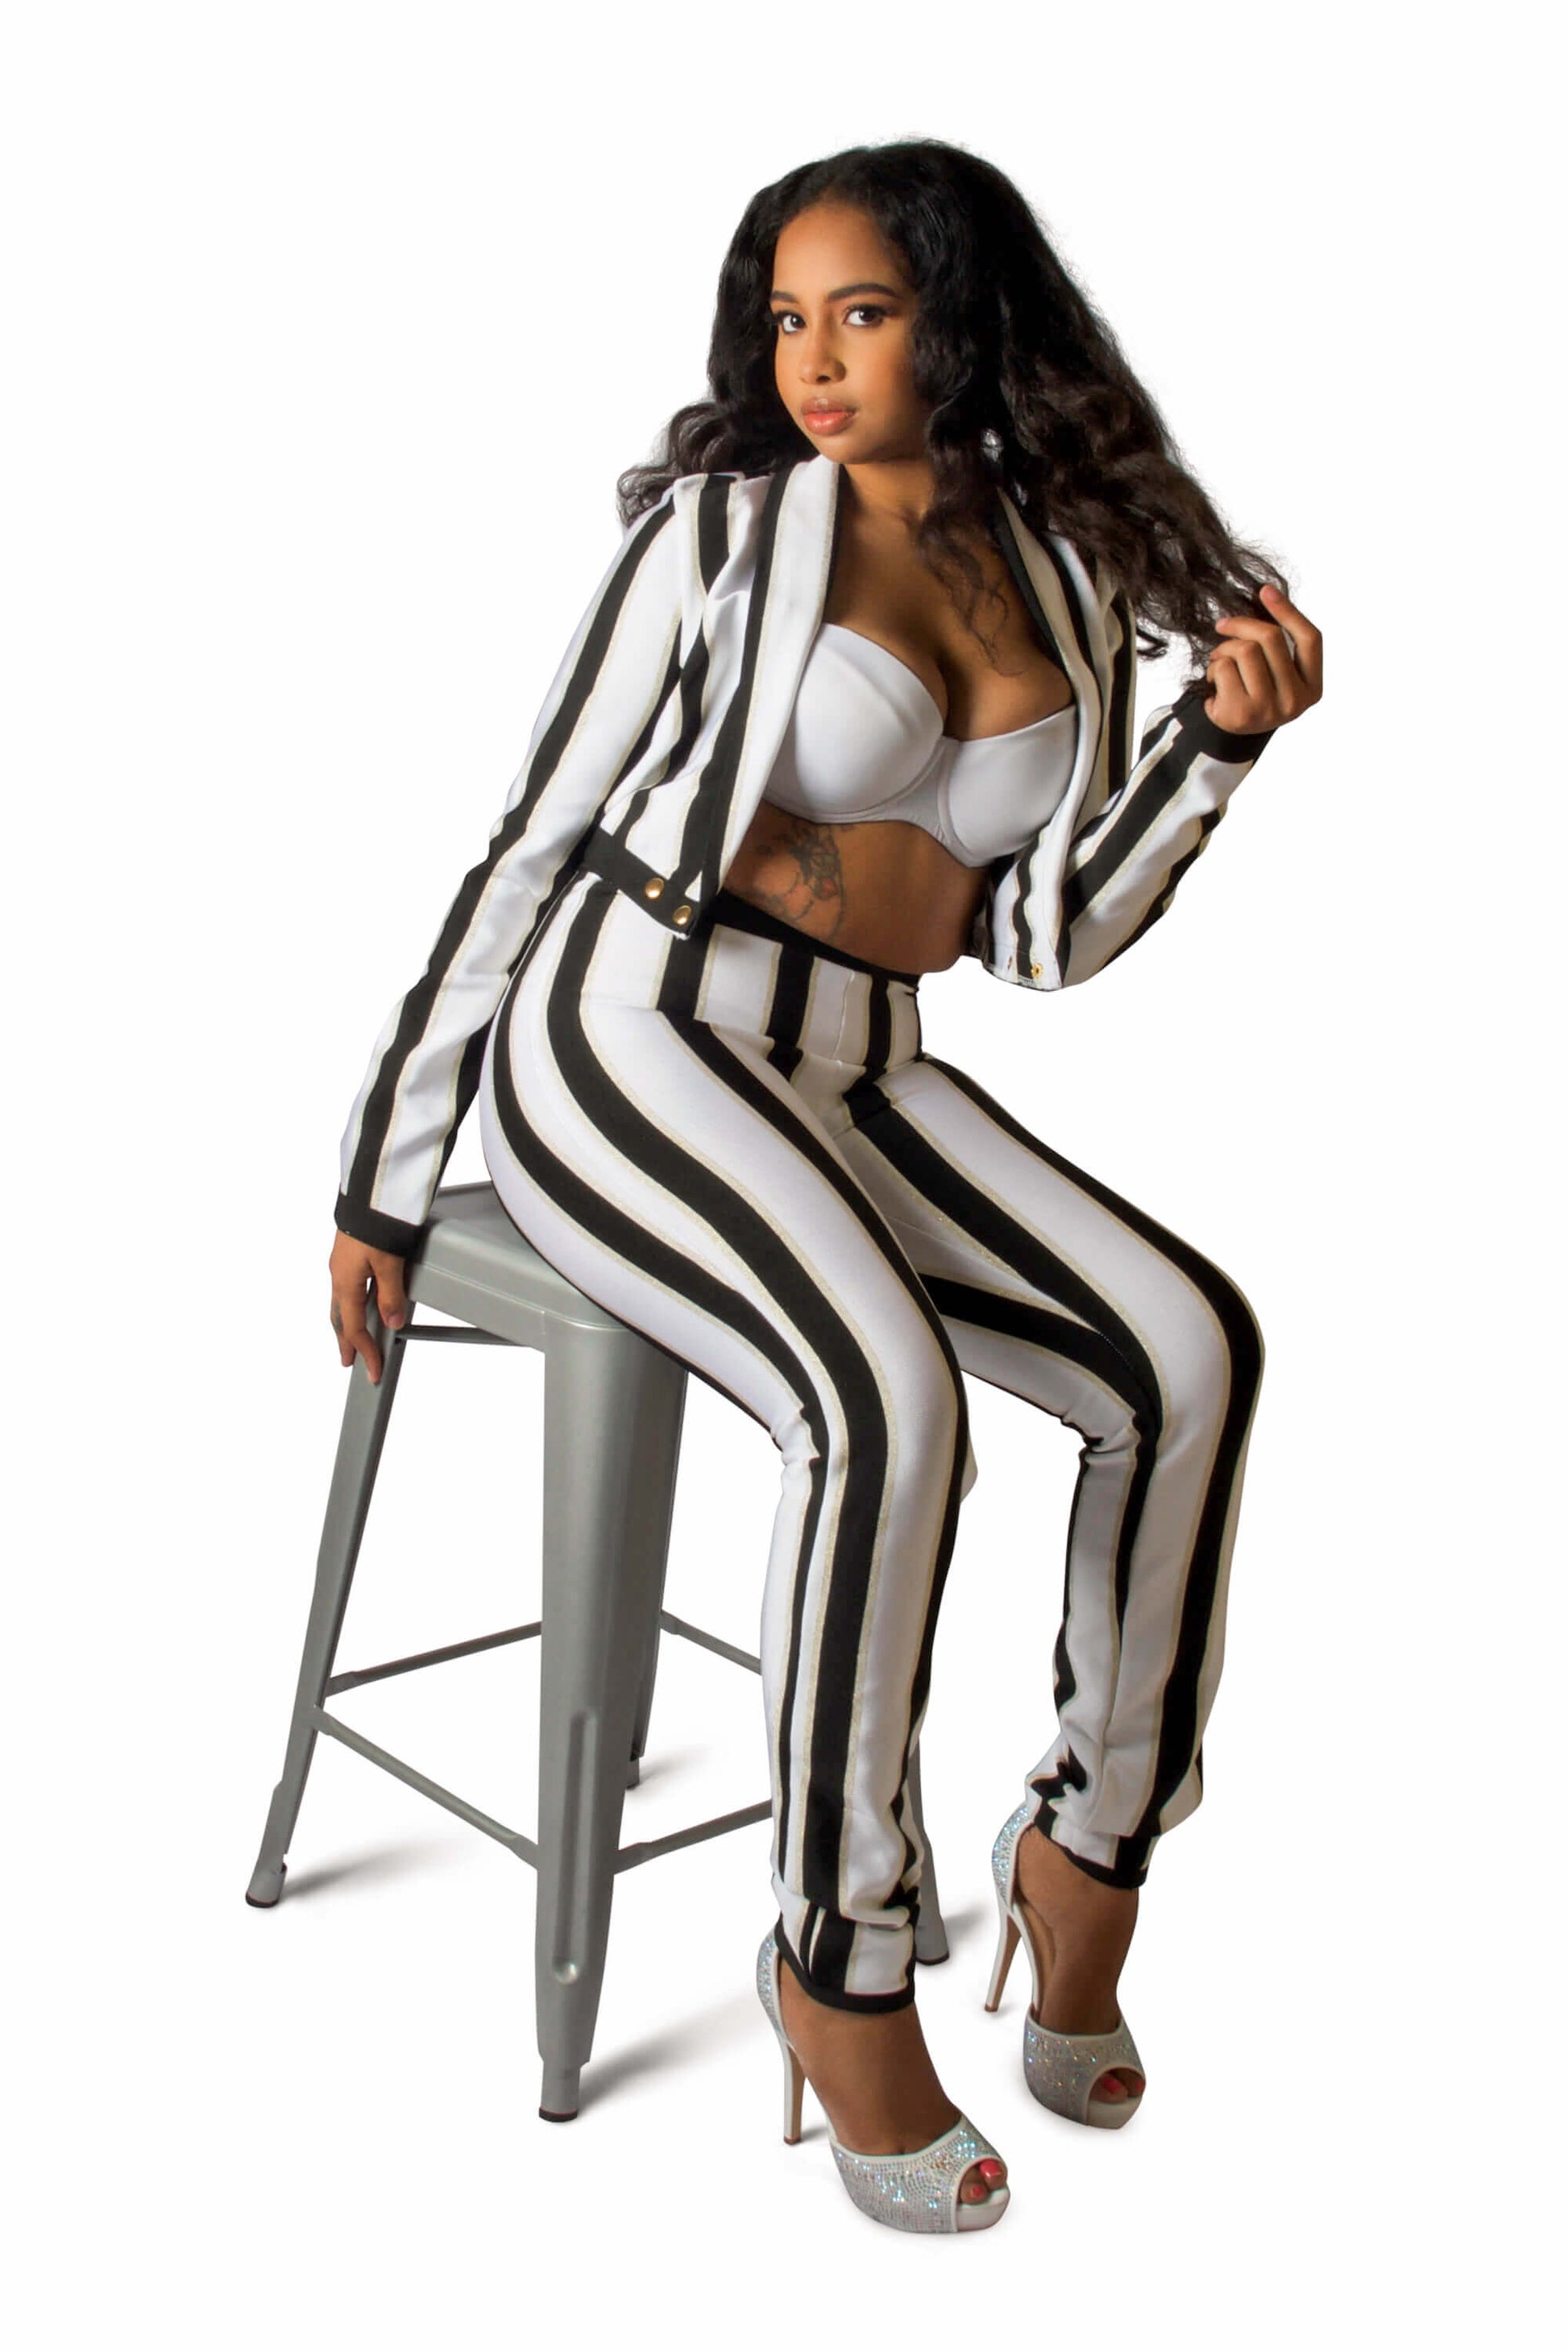 Stripe Black & White Two Piece Set for women ﻿Jacket  featuring a collar with open front and long Sleeve paired with matching Stretch High Waist Pants